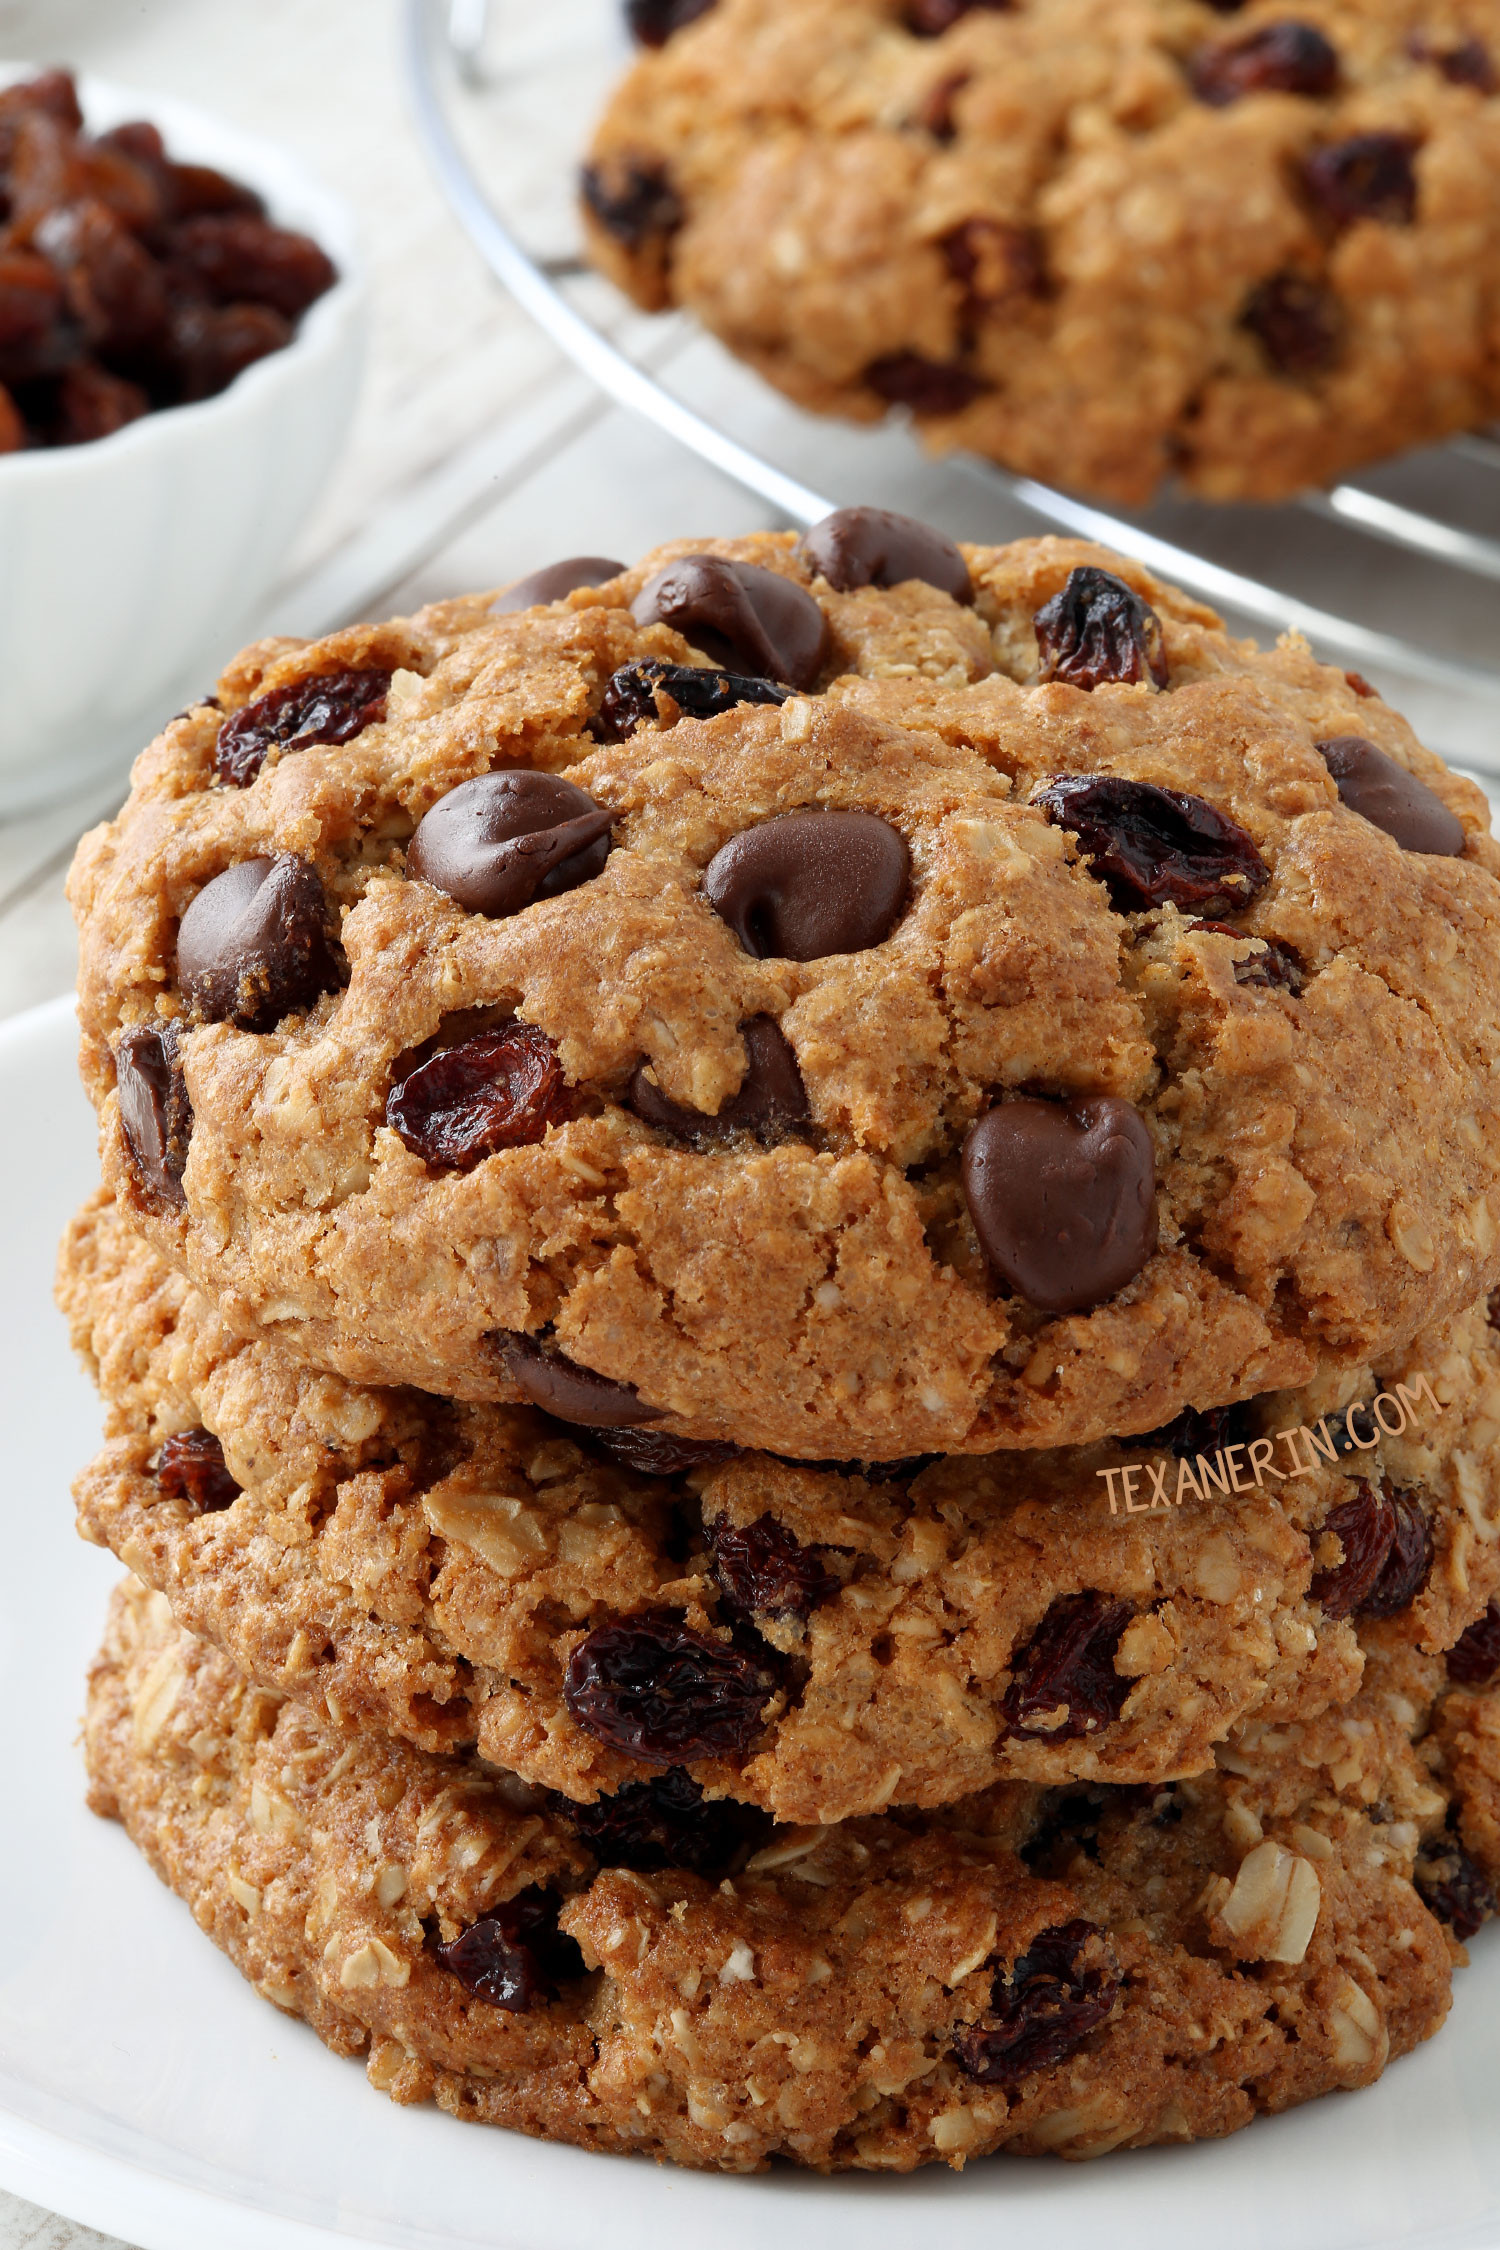 Gluten Free Dairy Free Oatmeal Cookies Lovely 20 Gluten Free Cookies You Ll Want to Inhale Texanerin